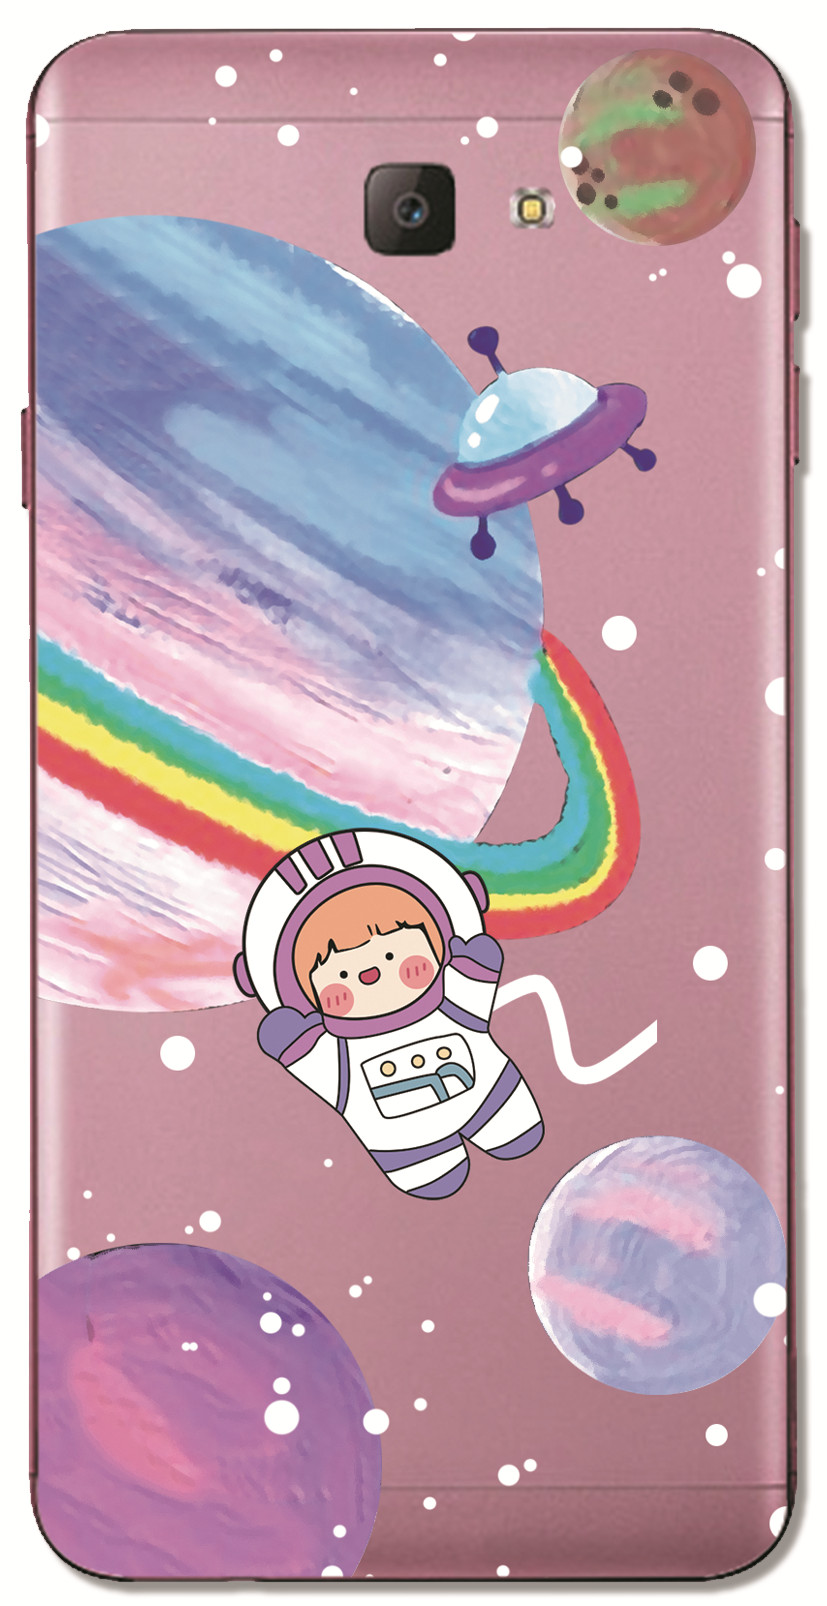 Samsung Galaxy A7 A5 A3 2017/A720 A520 A320 A6S A8S A9 A8 Star INS Cute Cartoon Big eyes furry Monster Clear Soft Silicone TPU Phone Casing Lovely Space Astronaut Spaceship Case Back Cover Couple